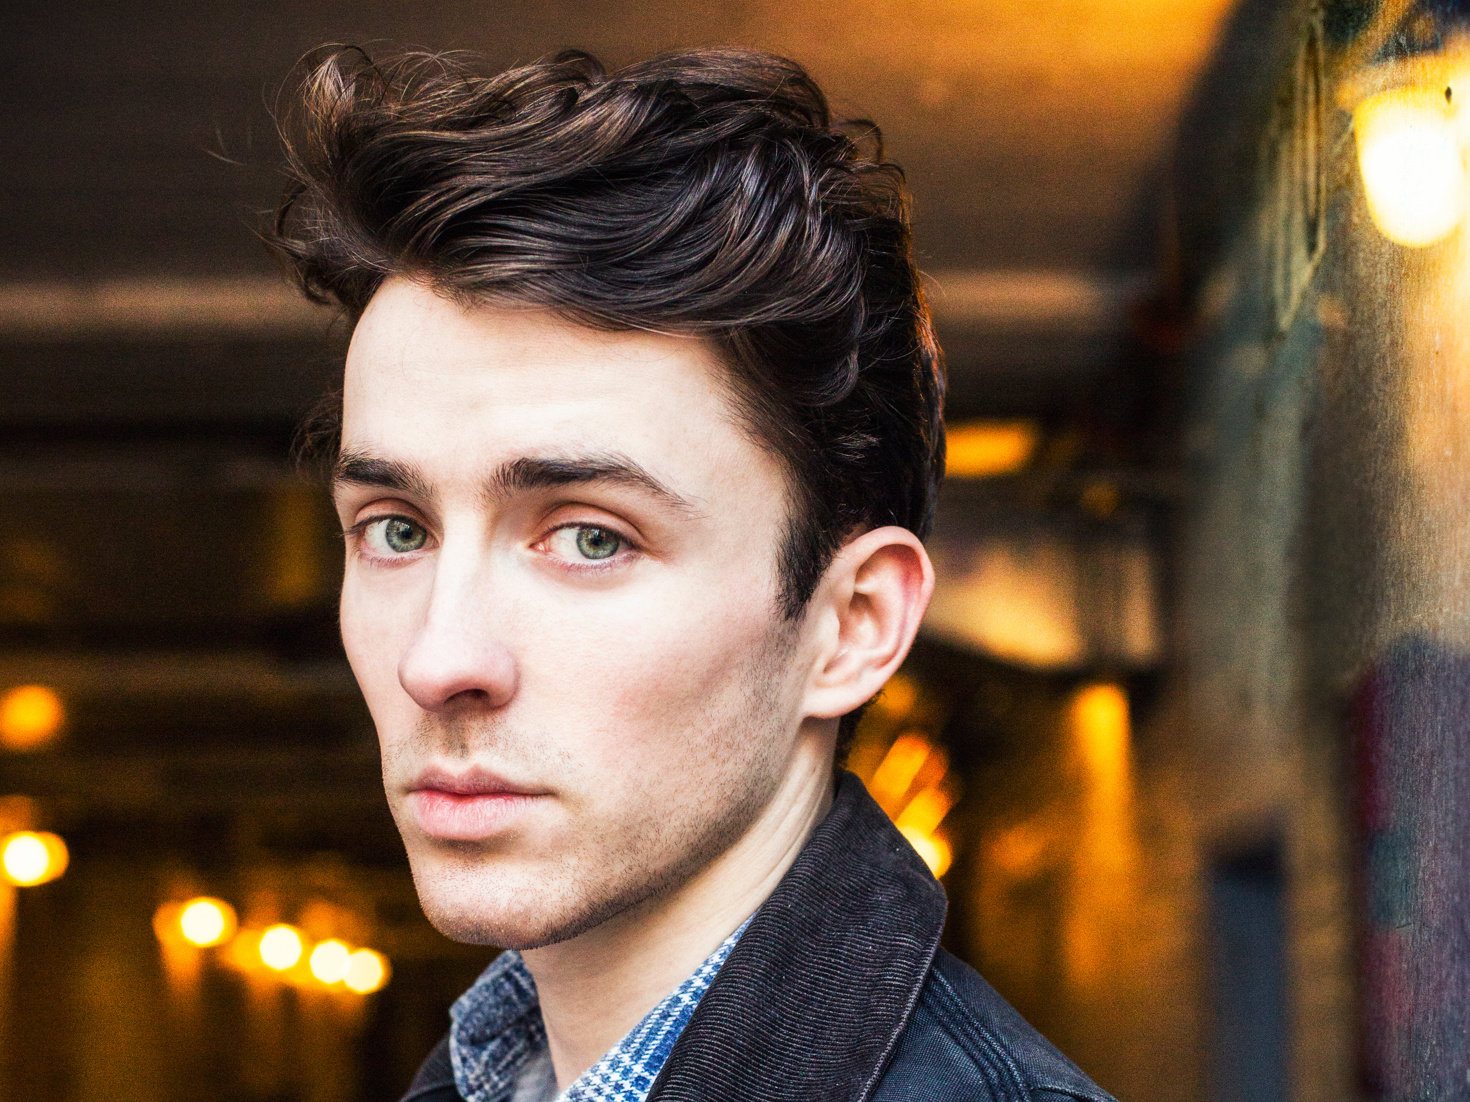 Matthew Beard photographed by Caitlin McNaney for Broadway.com.